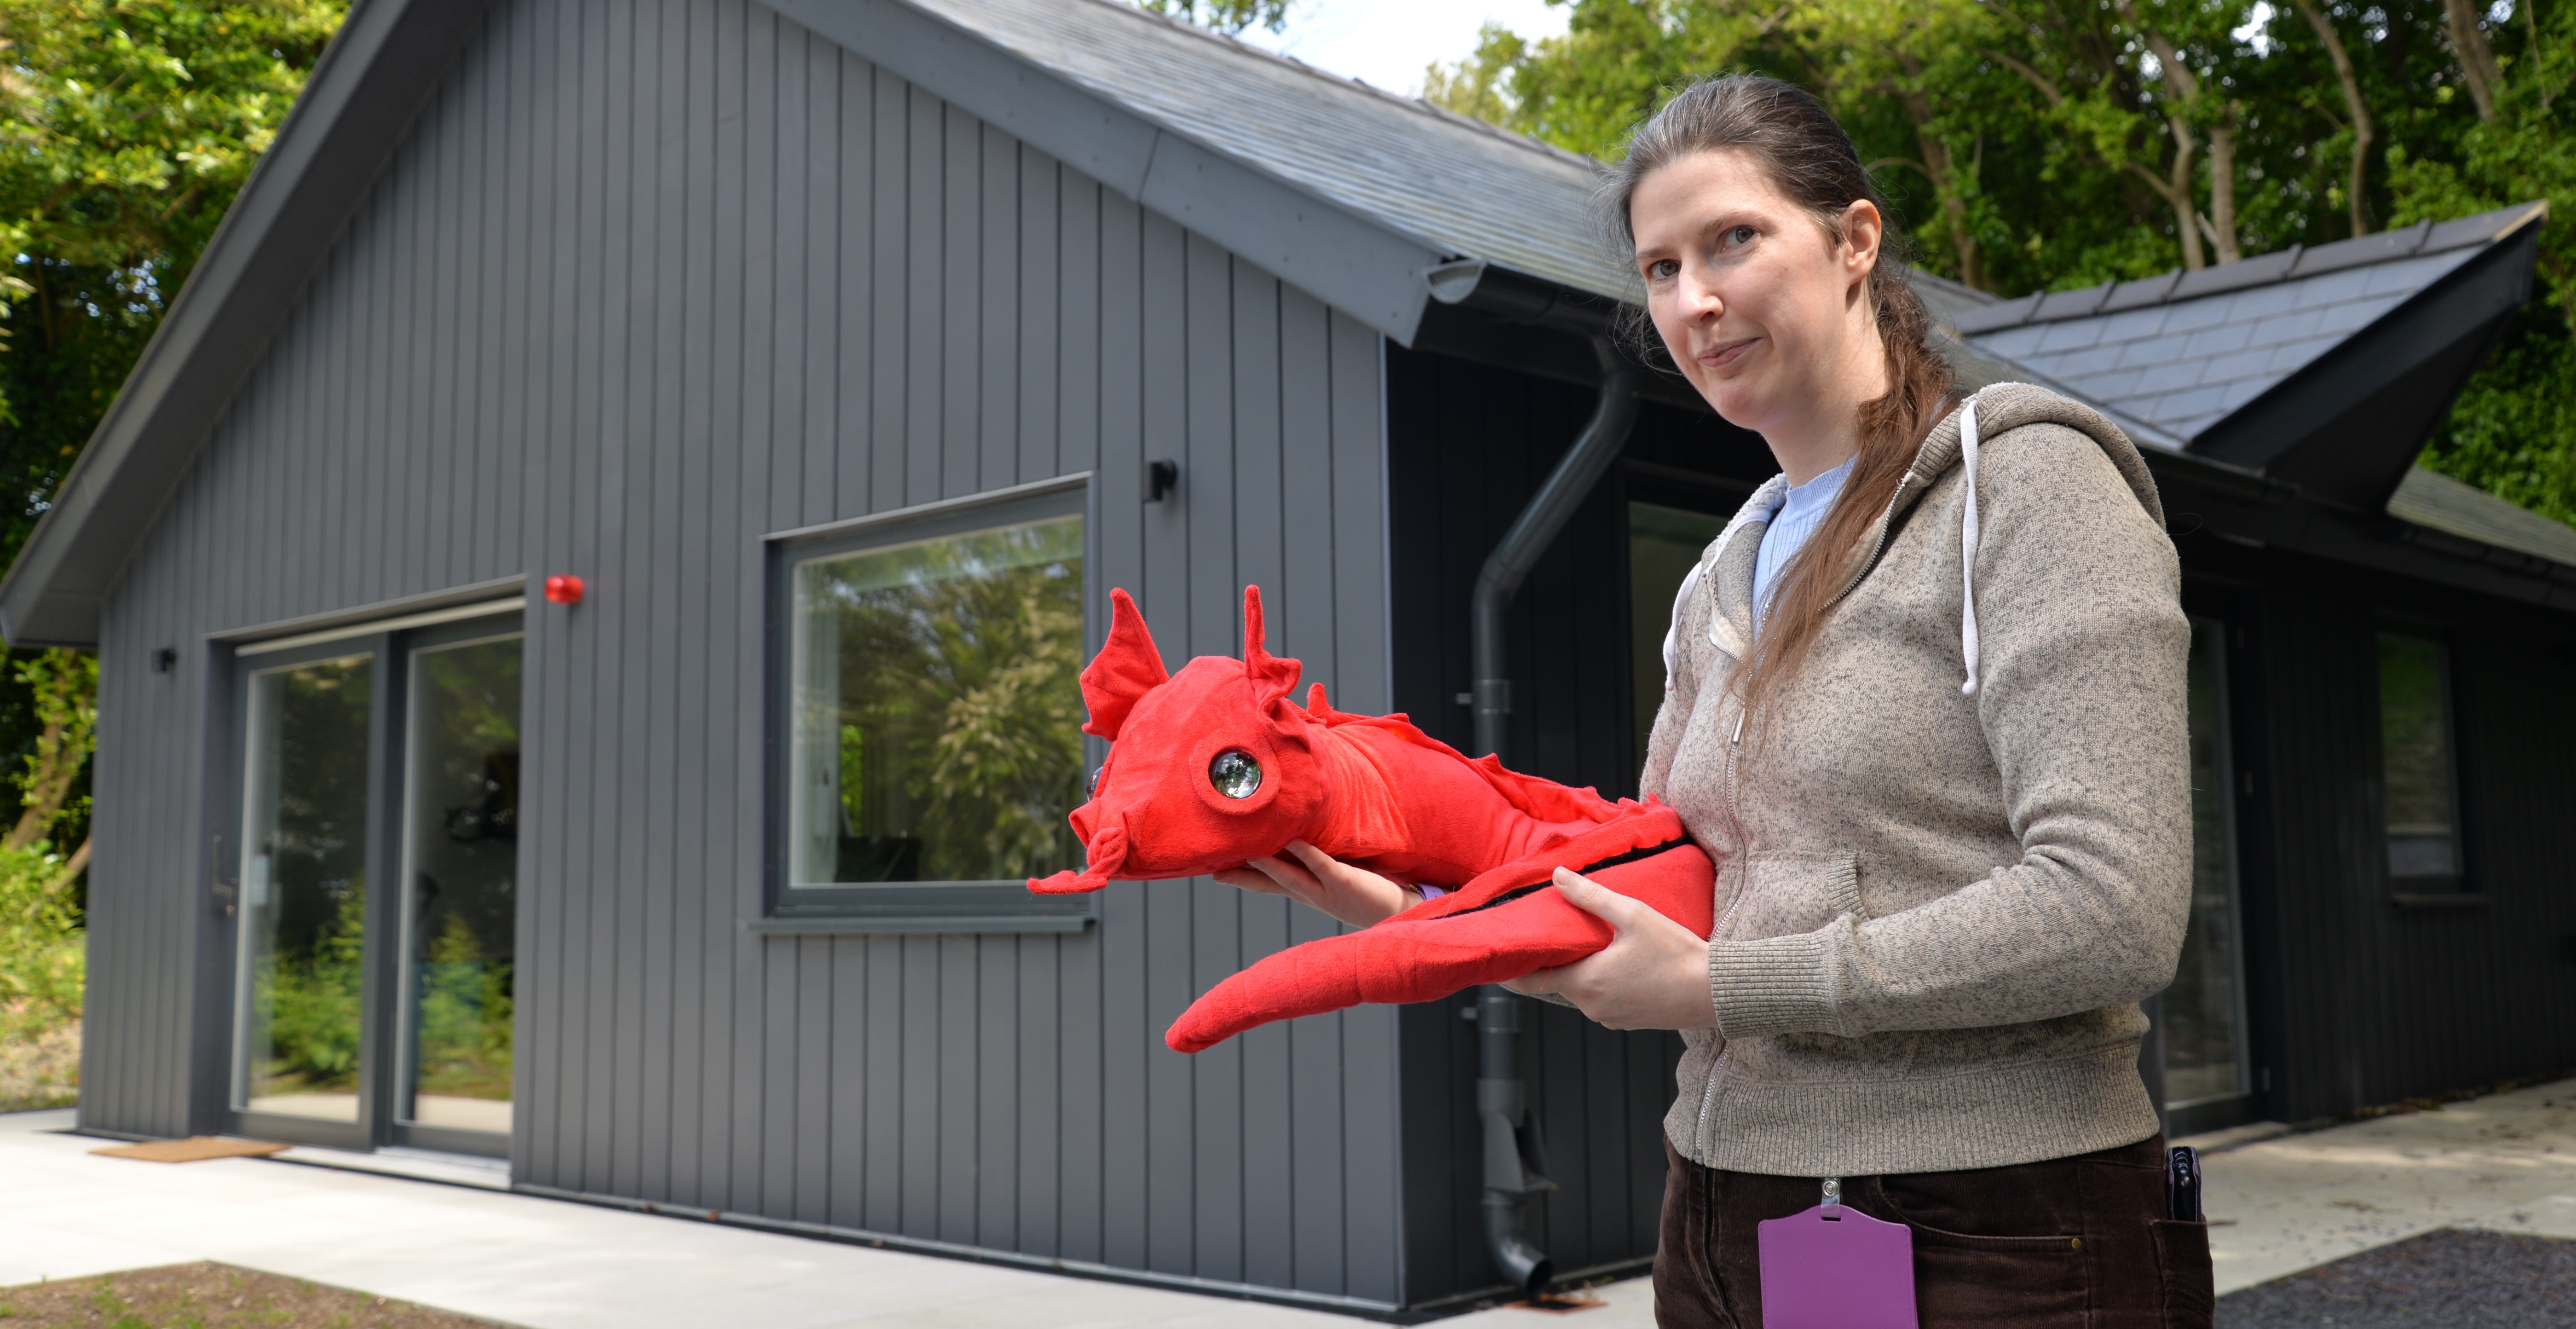 Dr Patricia Shaw and the yet-to-be-named robotic dragon outside the new Smart Home Lab where robots are being tested for how they might be able to help older people live independently for longer.